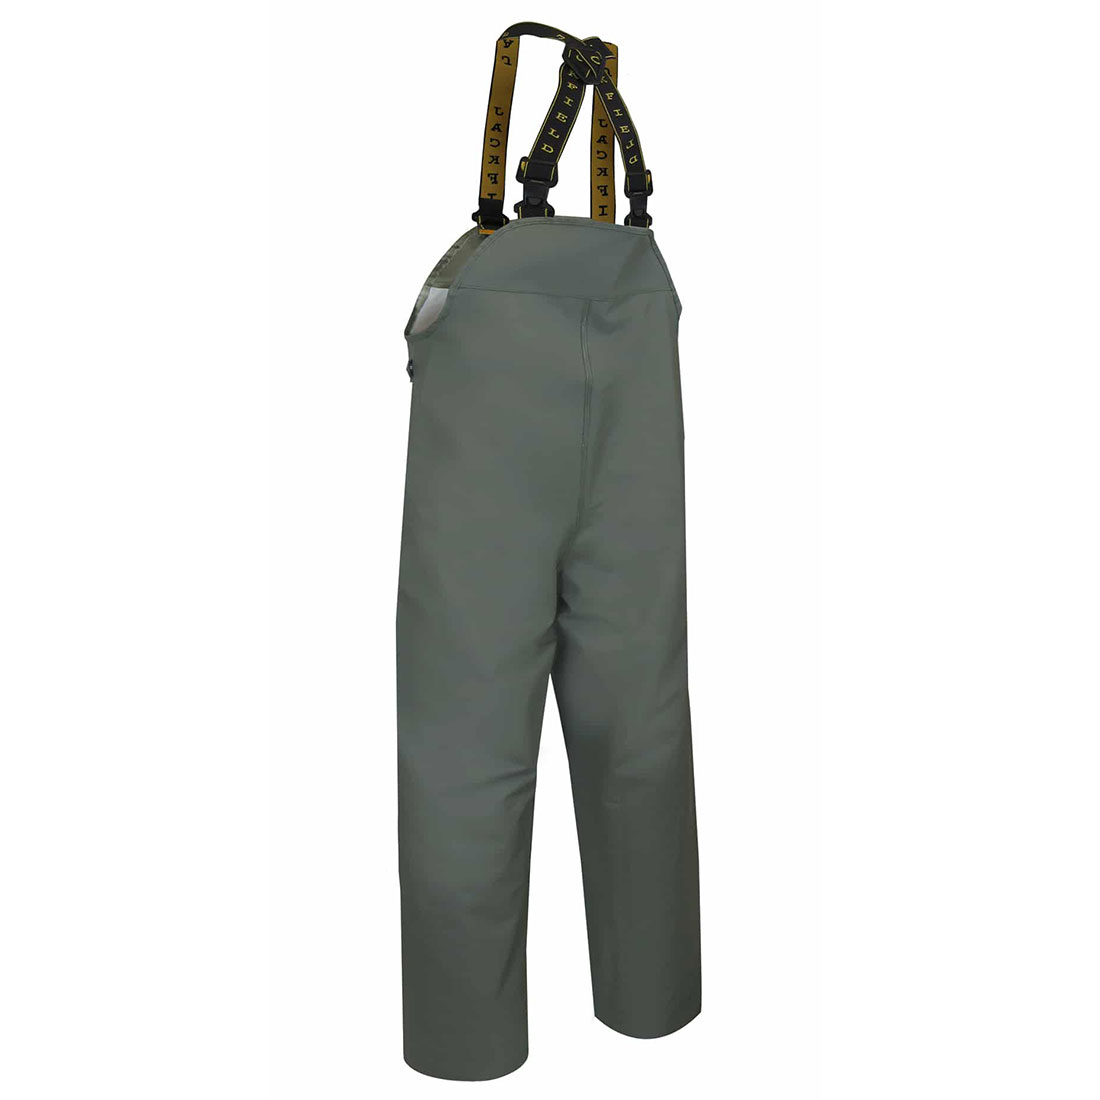 PVC/Polyester Durable Breathable Waterproof Rainsuit Bib Pants With Double Panel